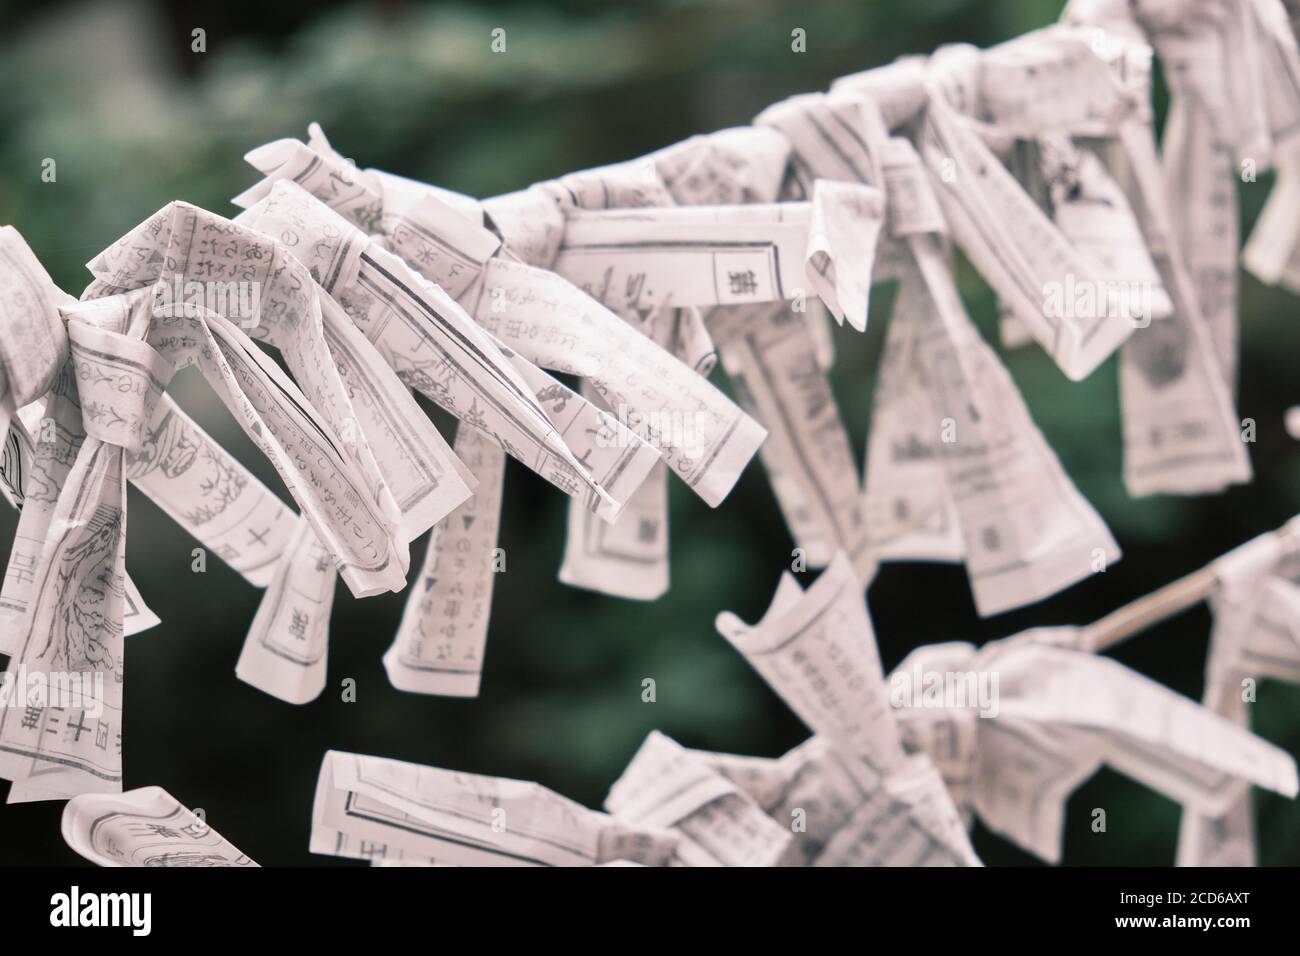 Omikuji fortune paper slips at a temple in Japan. Stock Photo